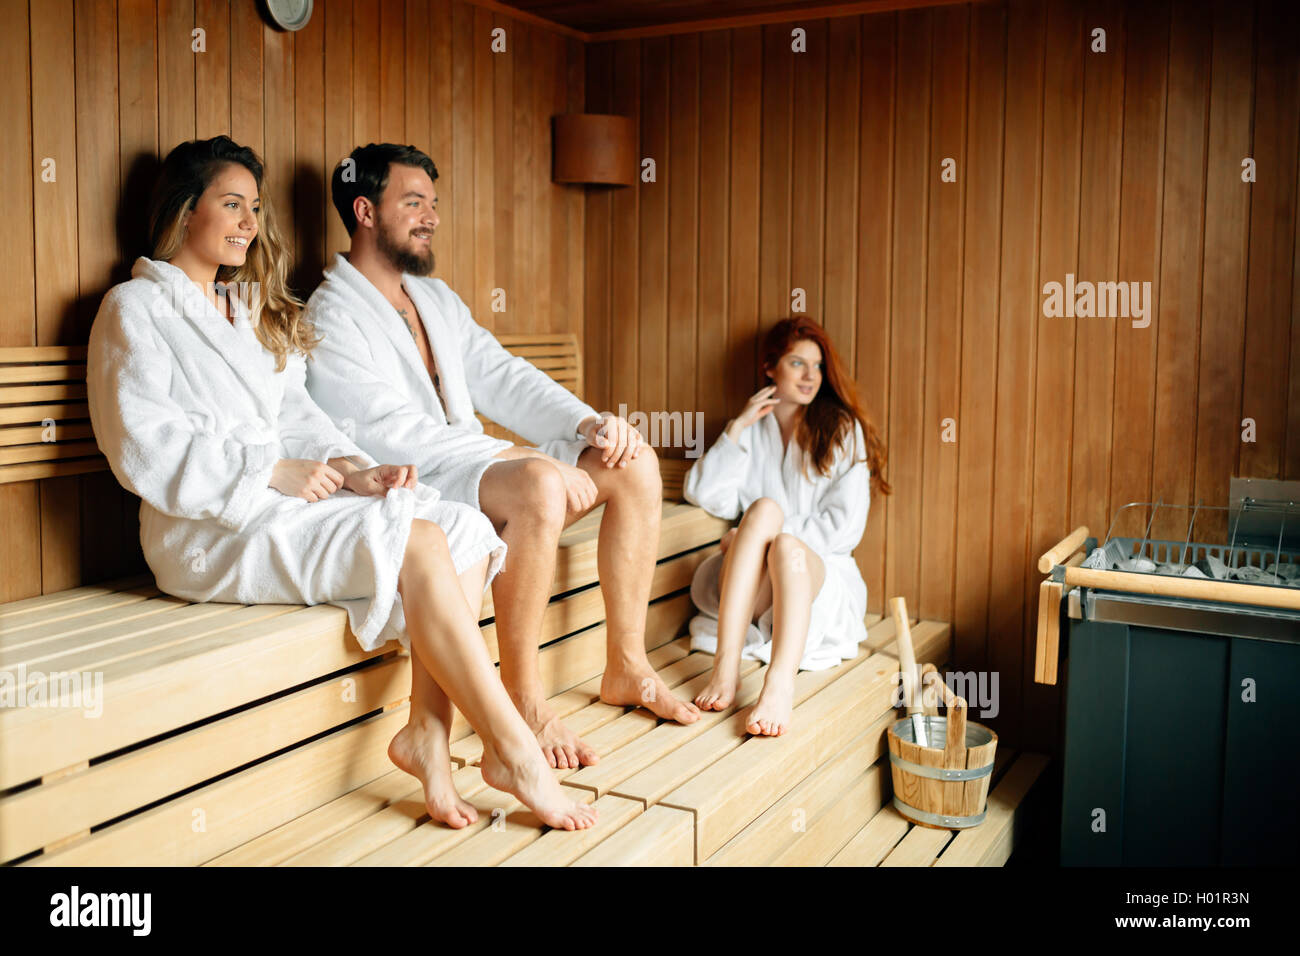 People in sauna relaxing and staying healthy Stock Photo